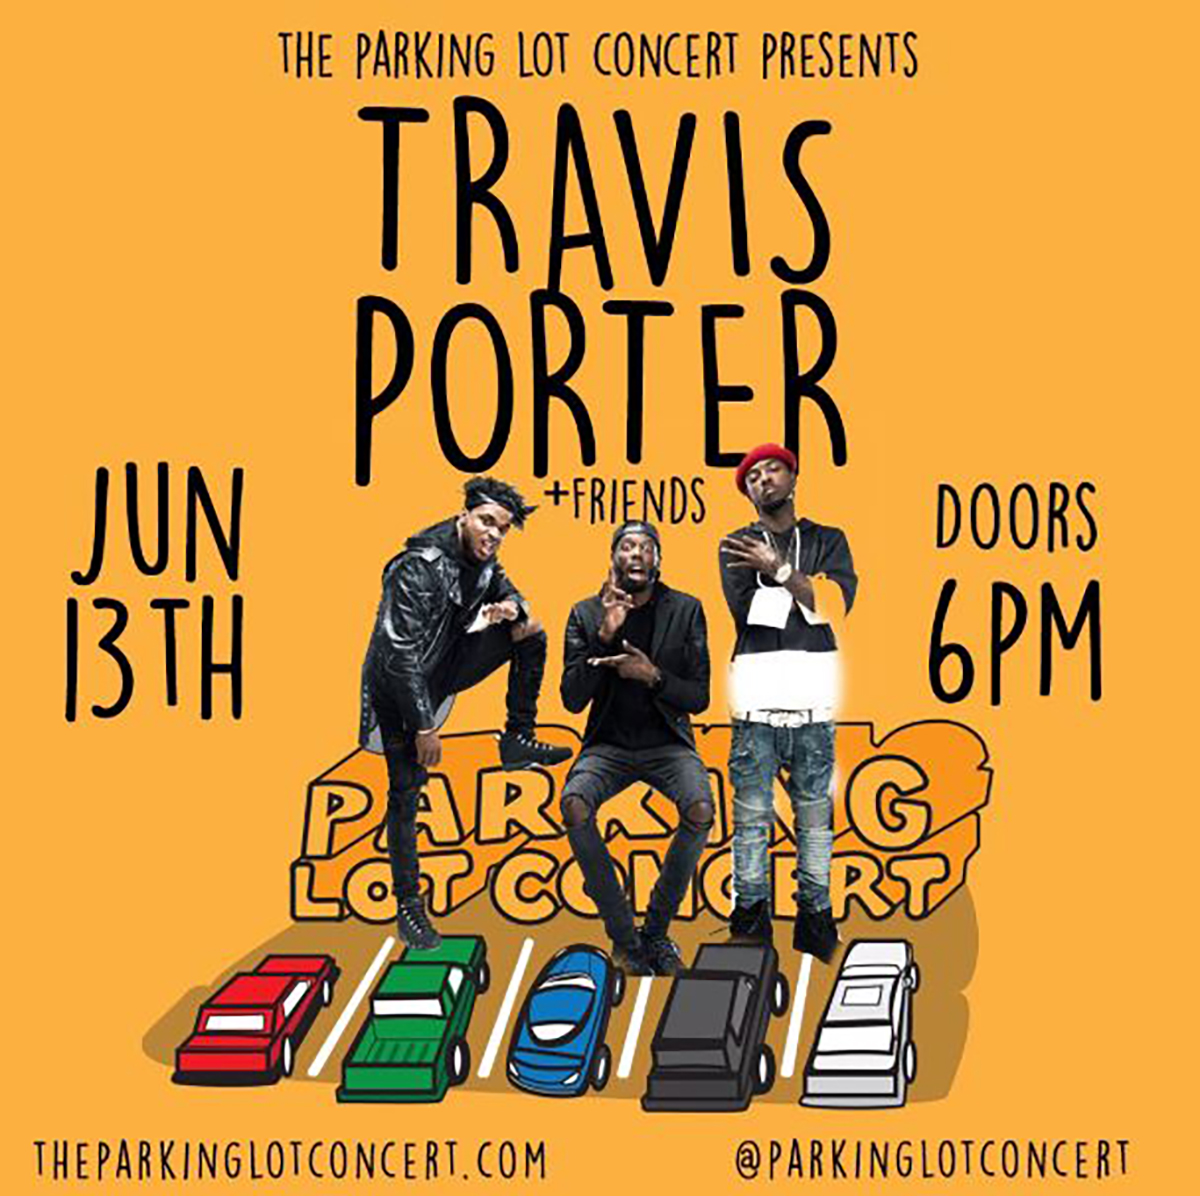 Rapper Travis Porter is inviting the public to a parking lot concert on June 13, 2020.